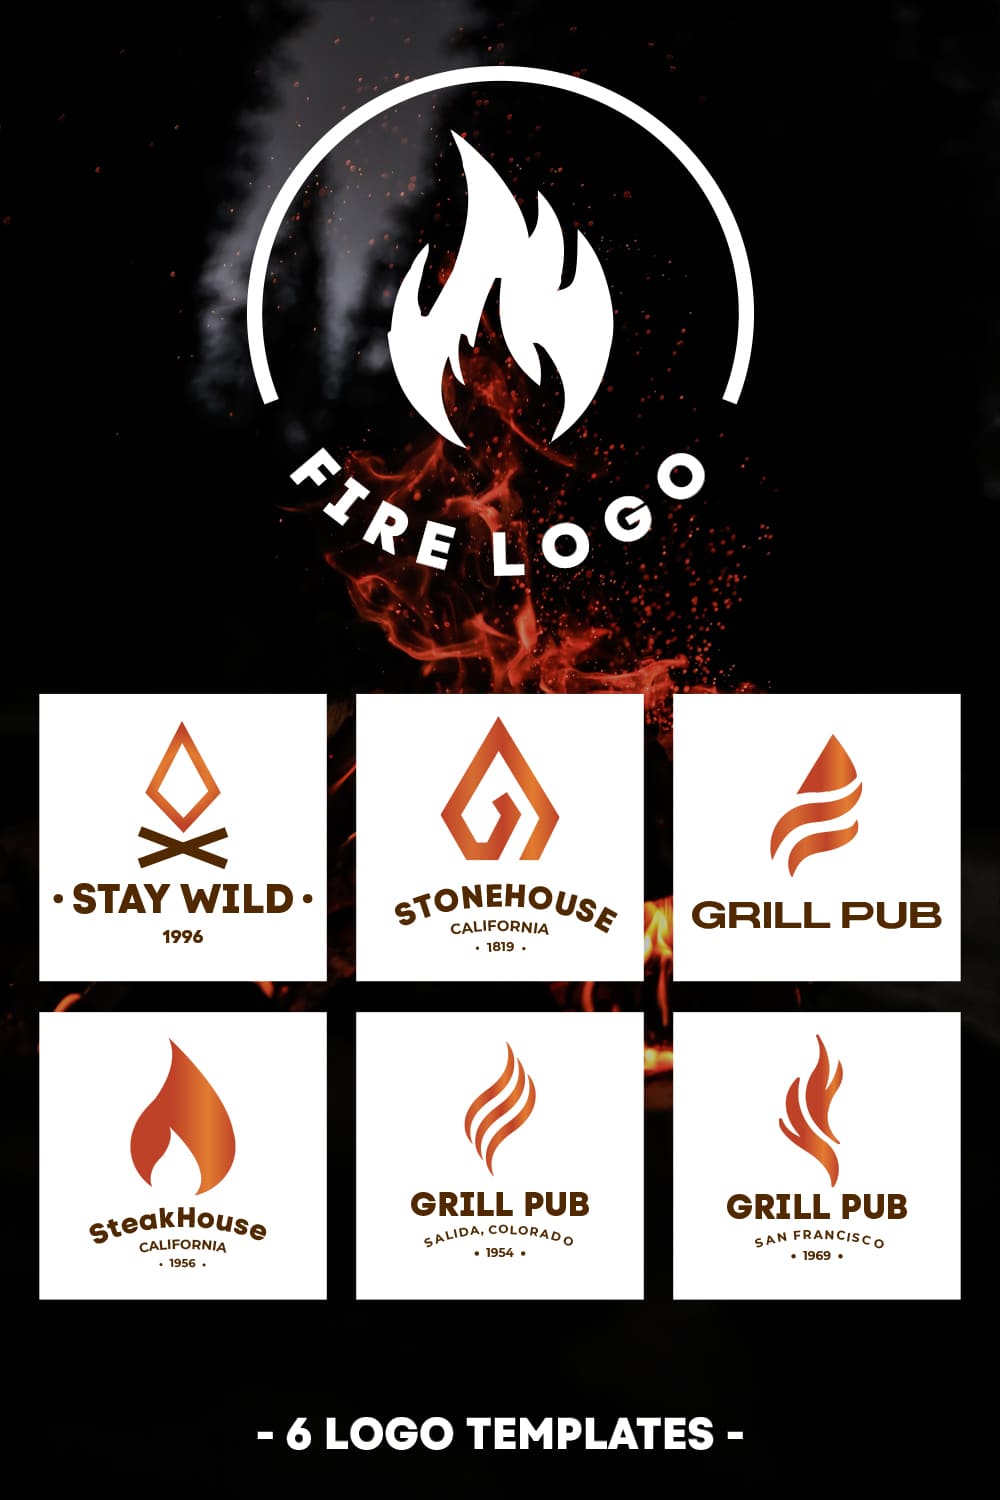 Dark, simple and understandable fire logos.